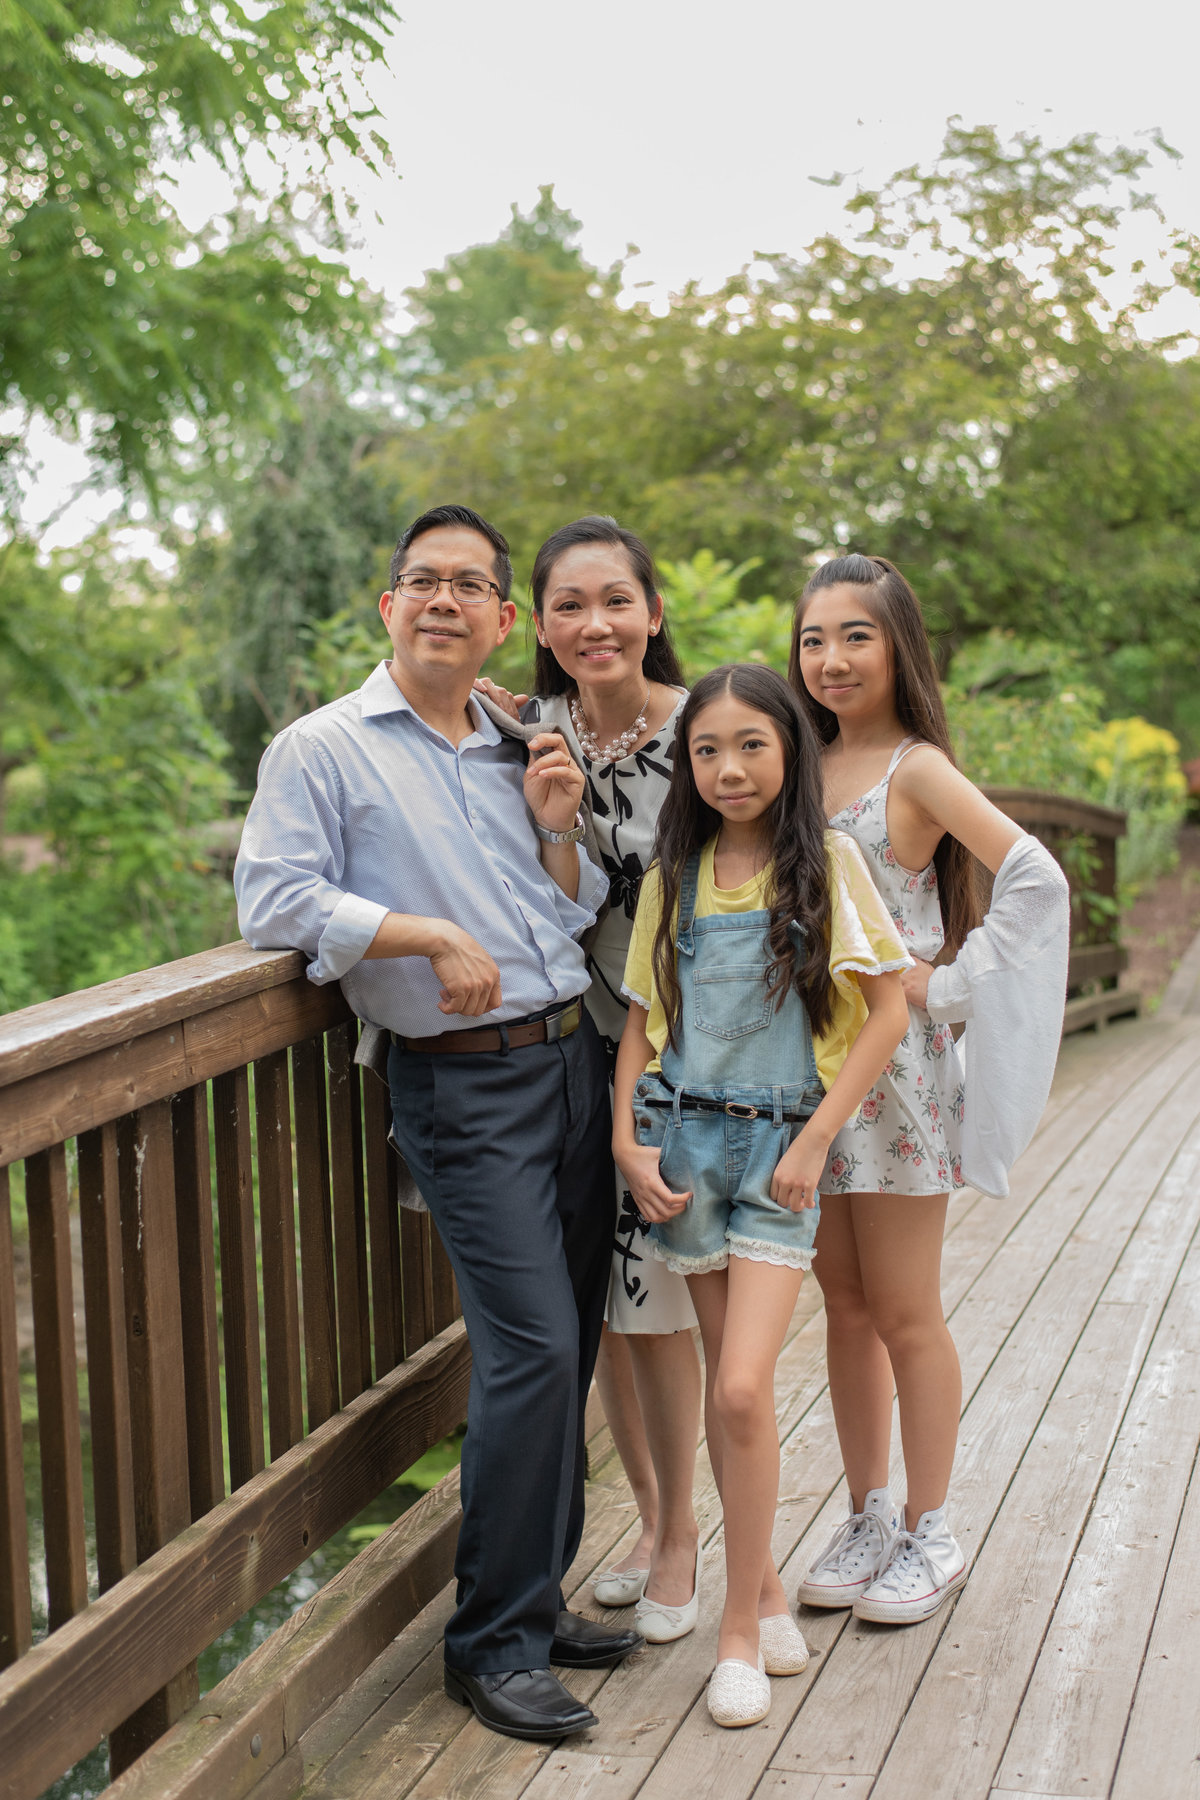 Family of 4 standing together on wooden bridge